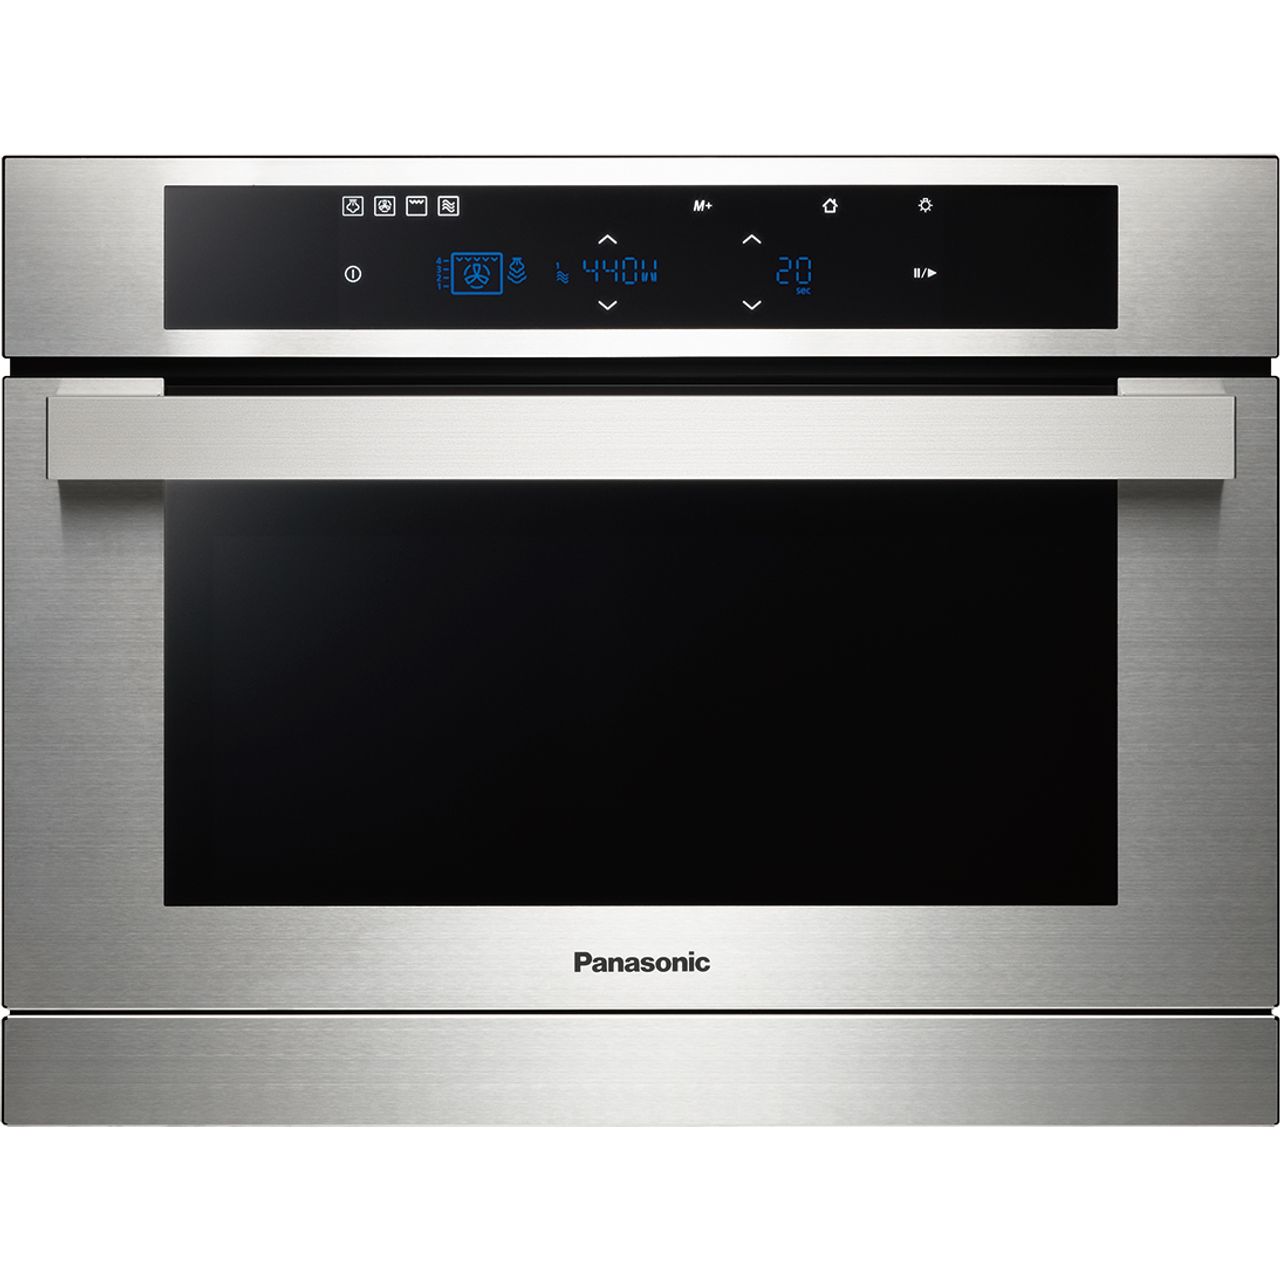 Panasonic HLSX485SBTQ Built In Combination Microwave Oven Reviews